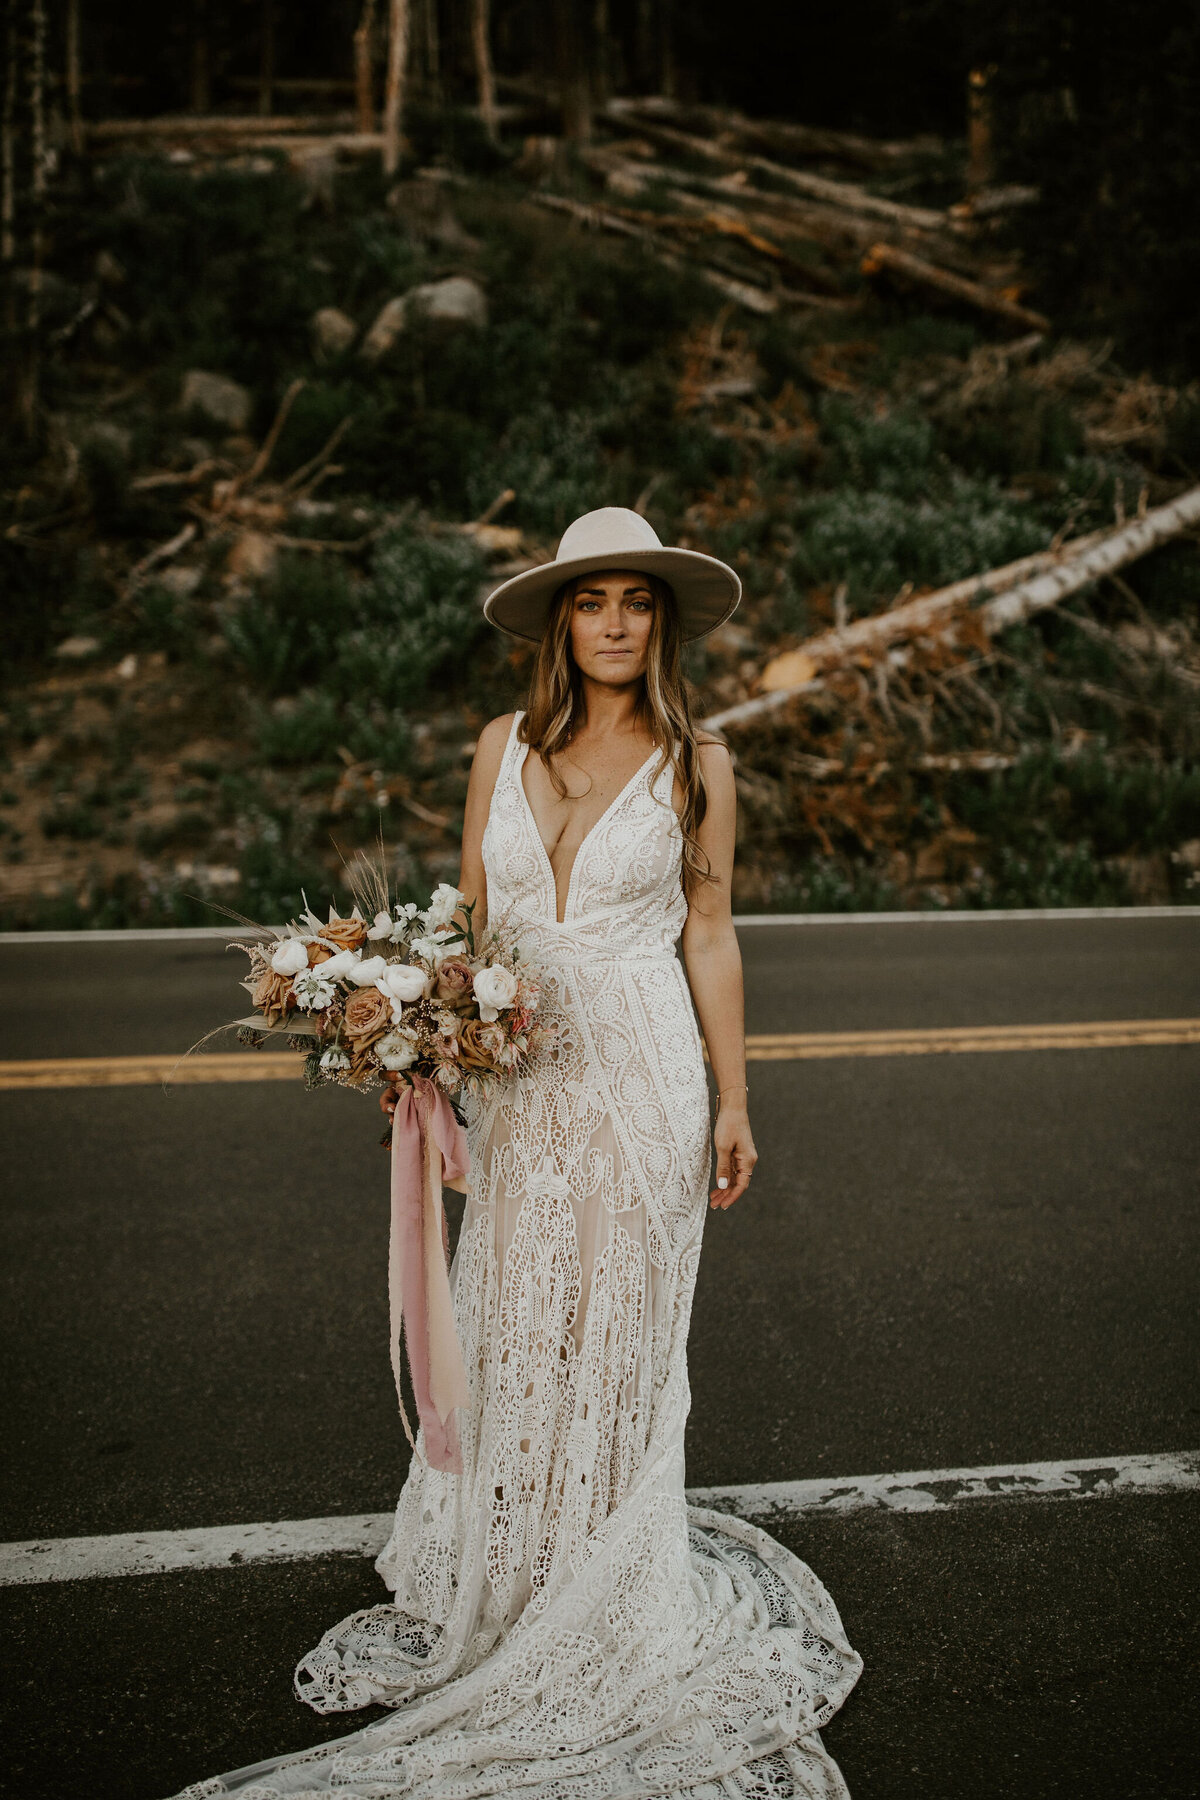 Bride wearing a white wedding gown and hat holding a bouquet of blush and white roses standing in the middle of the road.